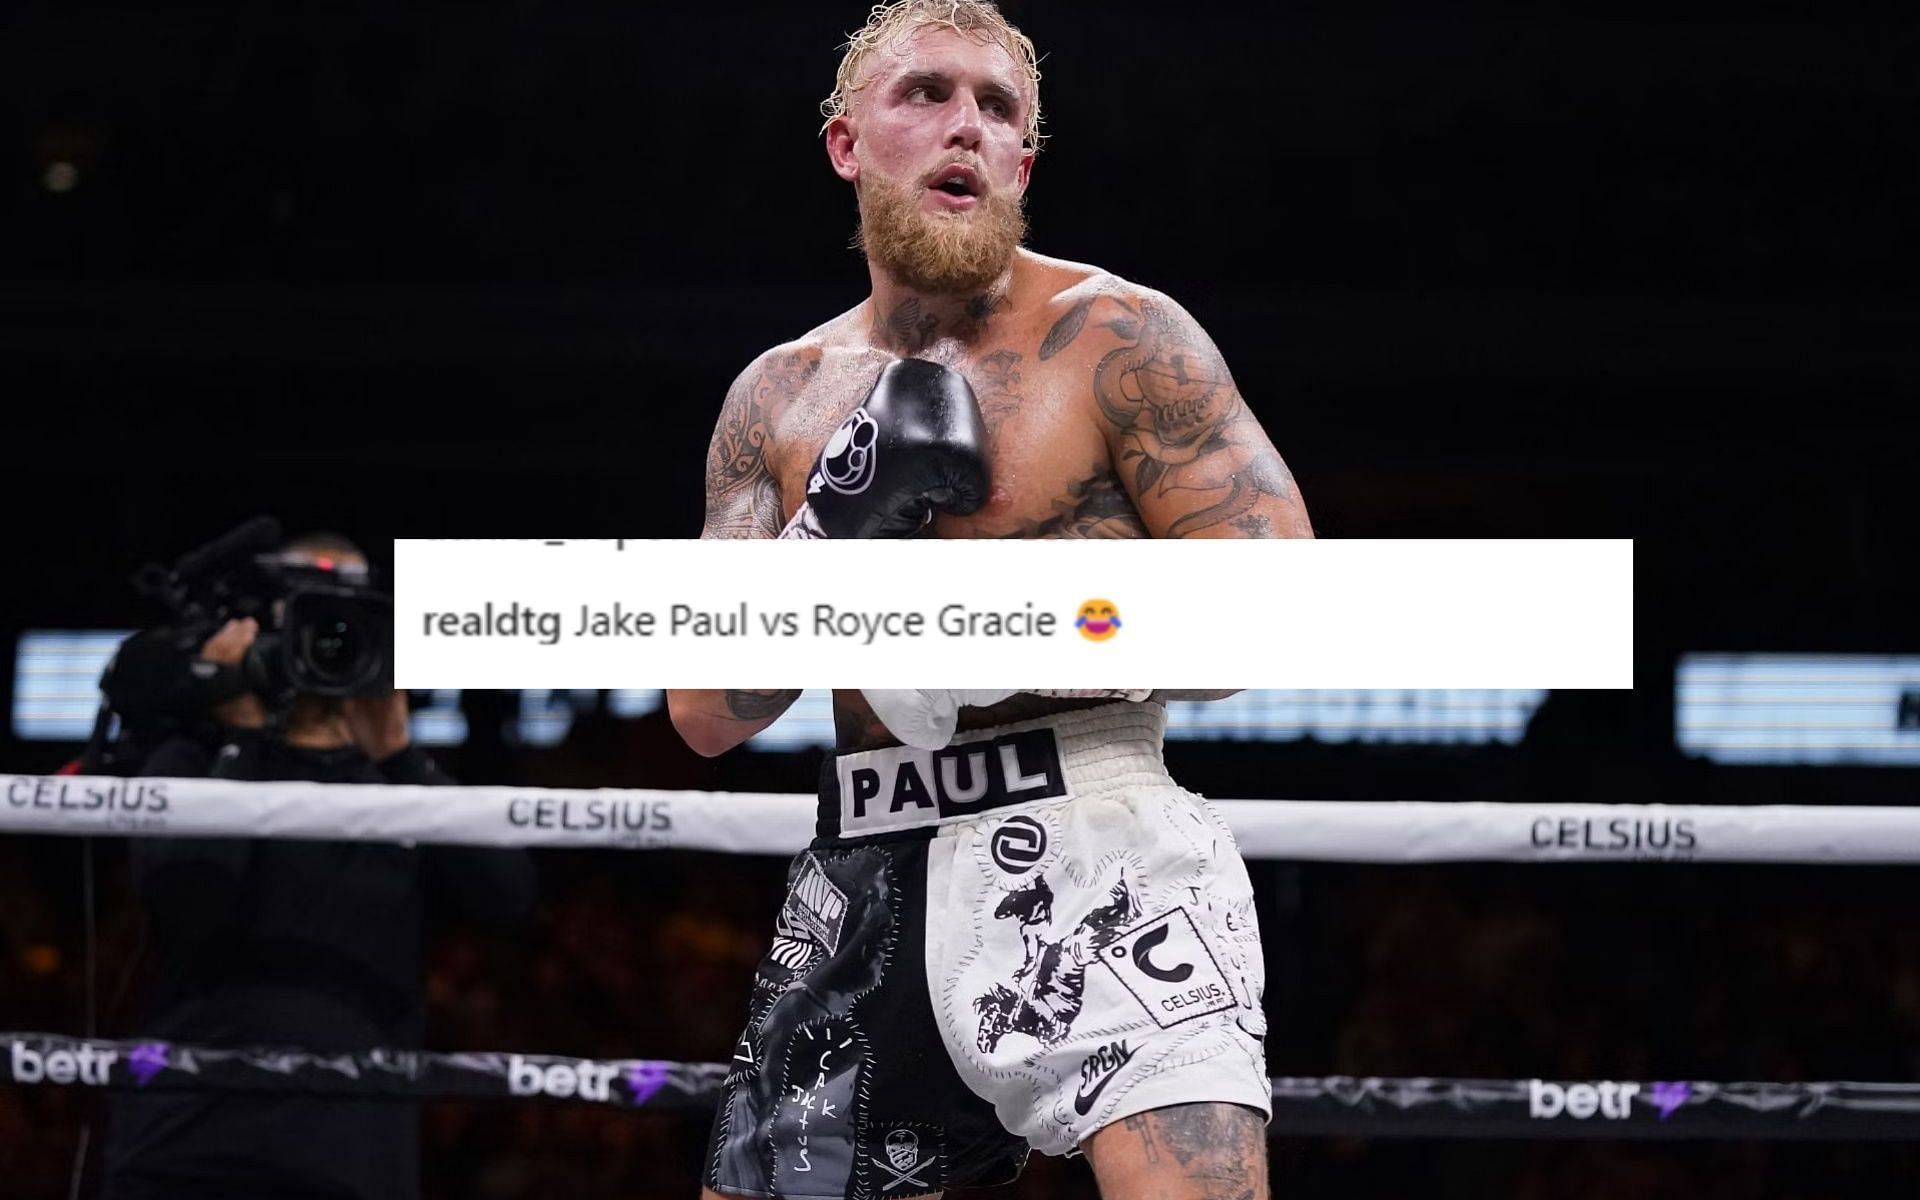 [Images from Getty and @jakepaul on Instagram]